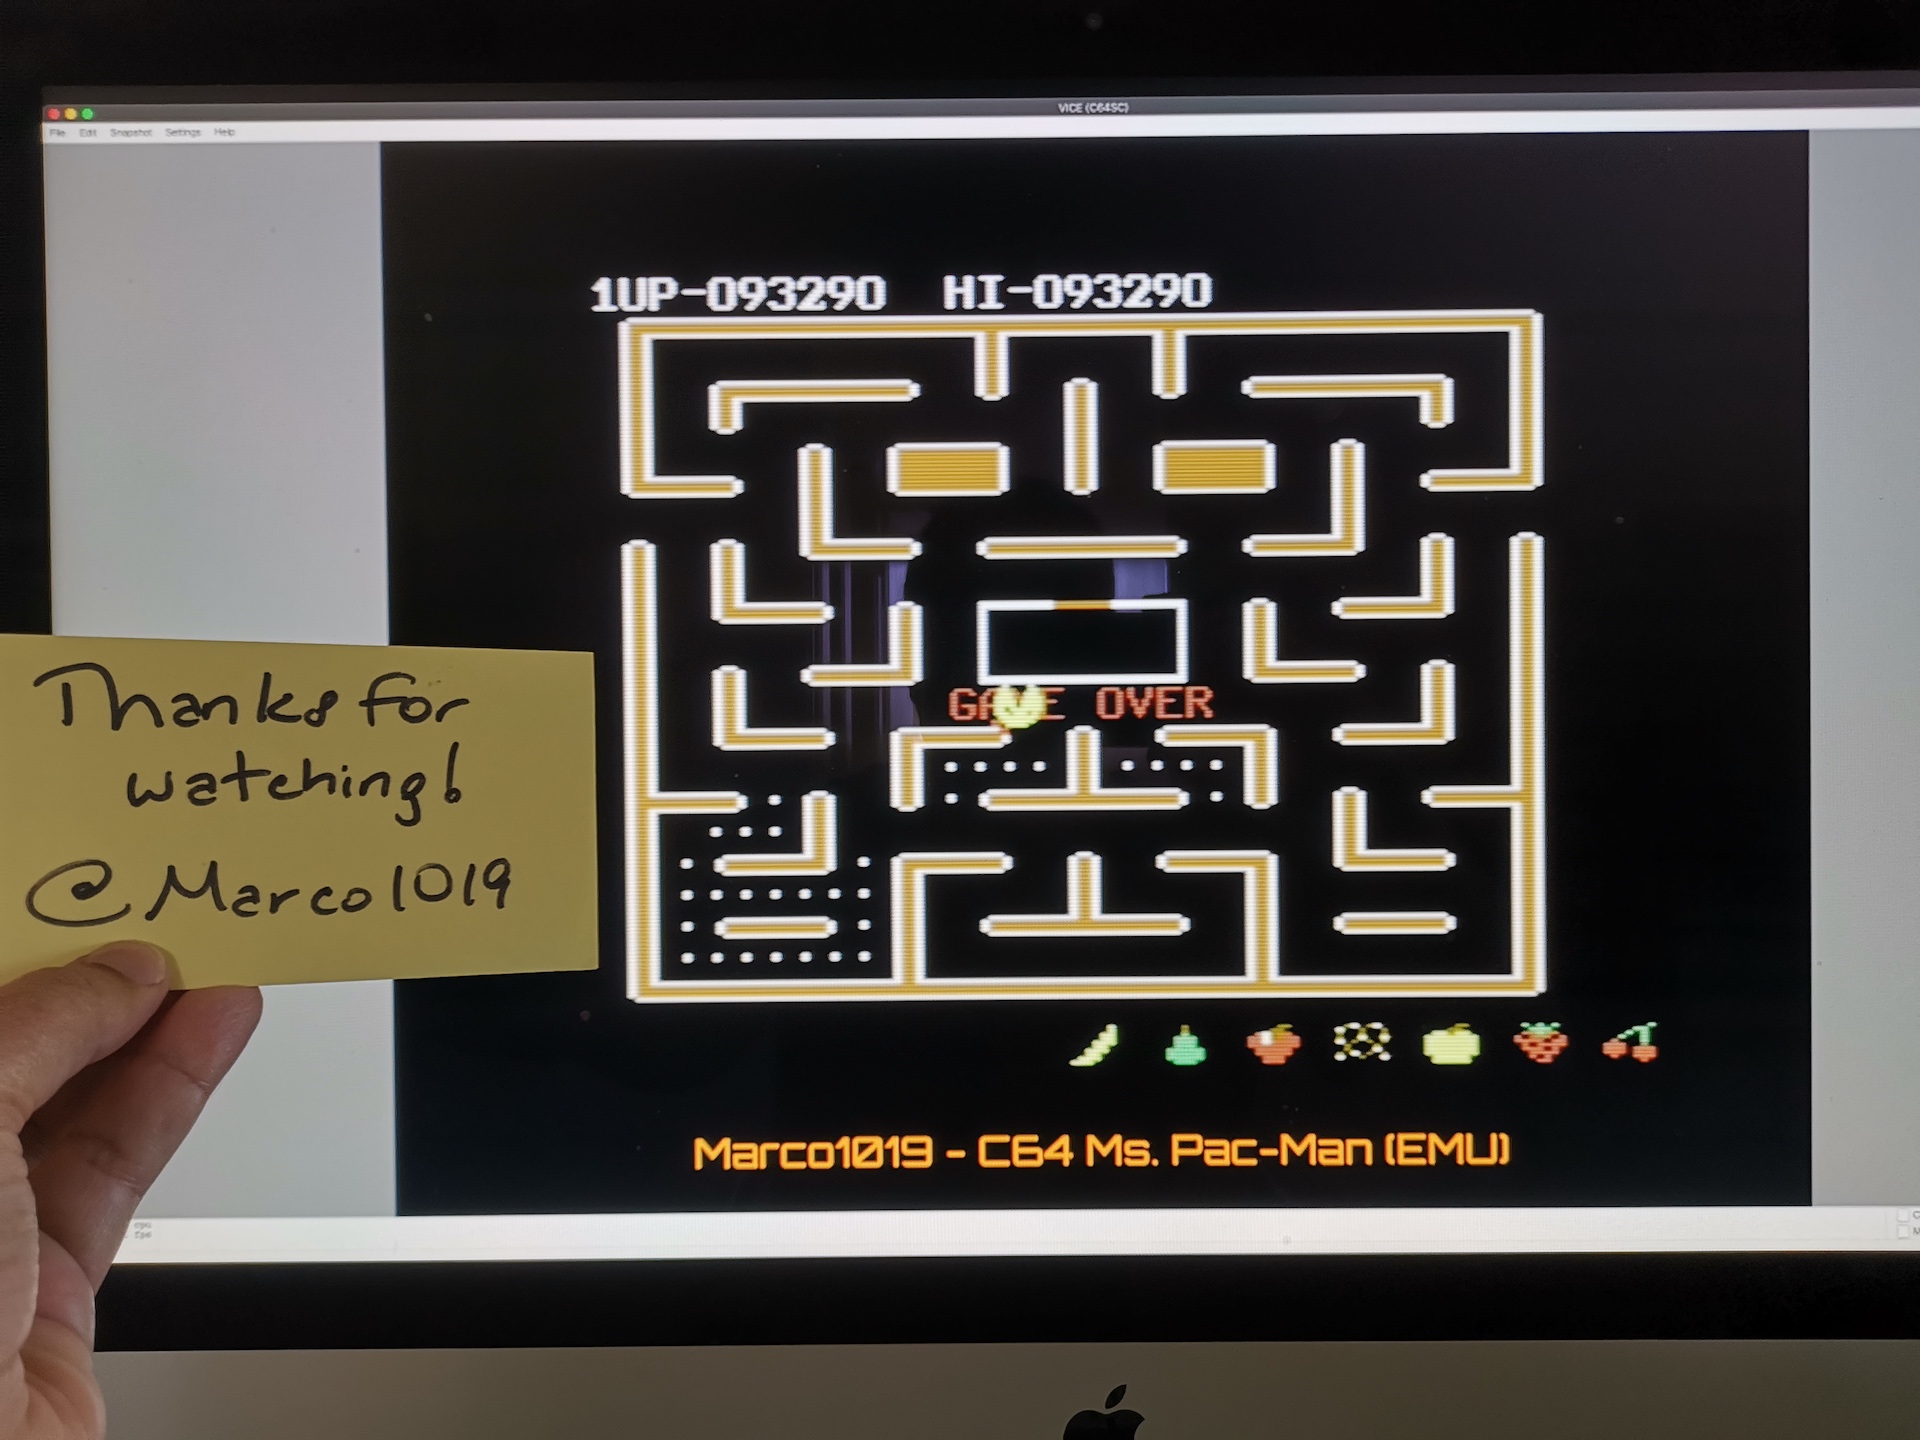 Marco1019: Ms. Pac-Man [Banana Start] (Commodore 64 Emulated) 93,290 points on 2021-02-06 16:33:46